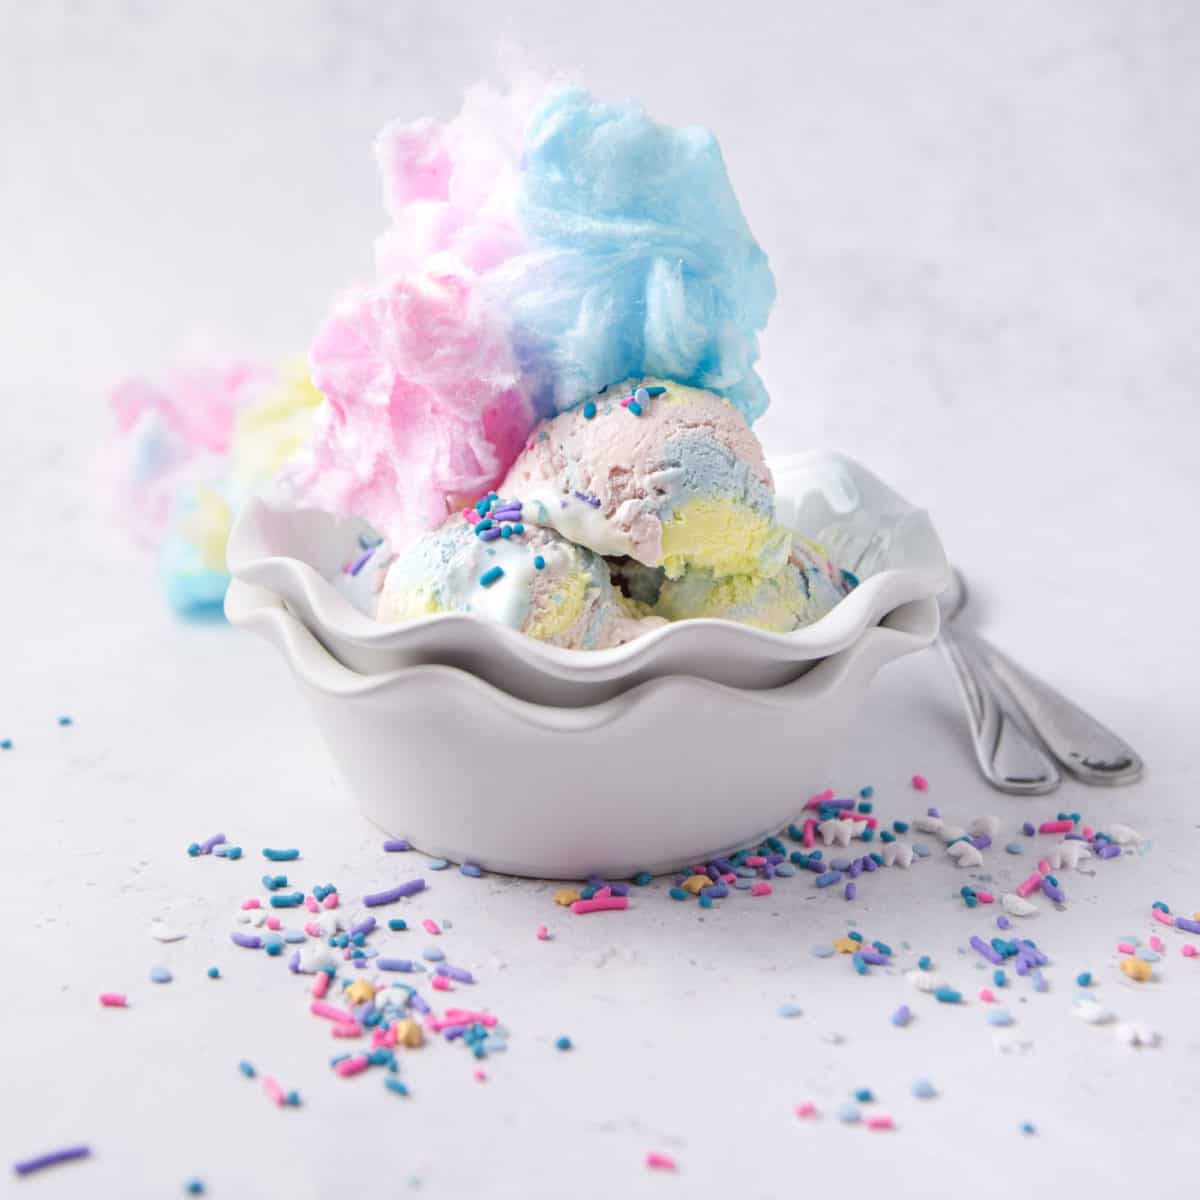 A bowl of homemade ice cream with cotton candy on top.